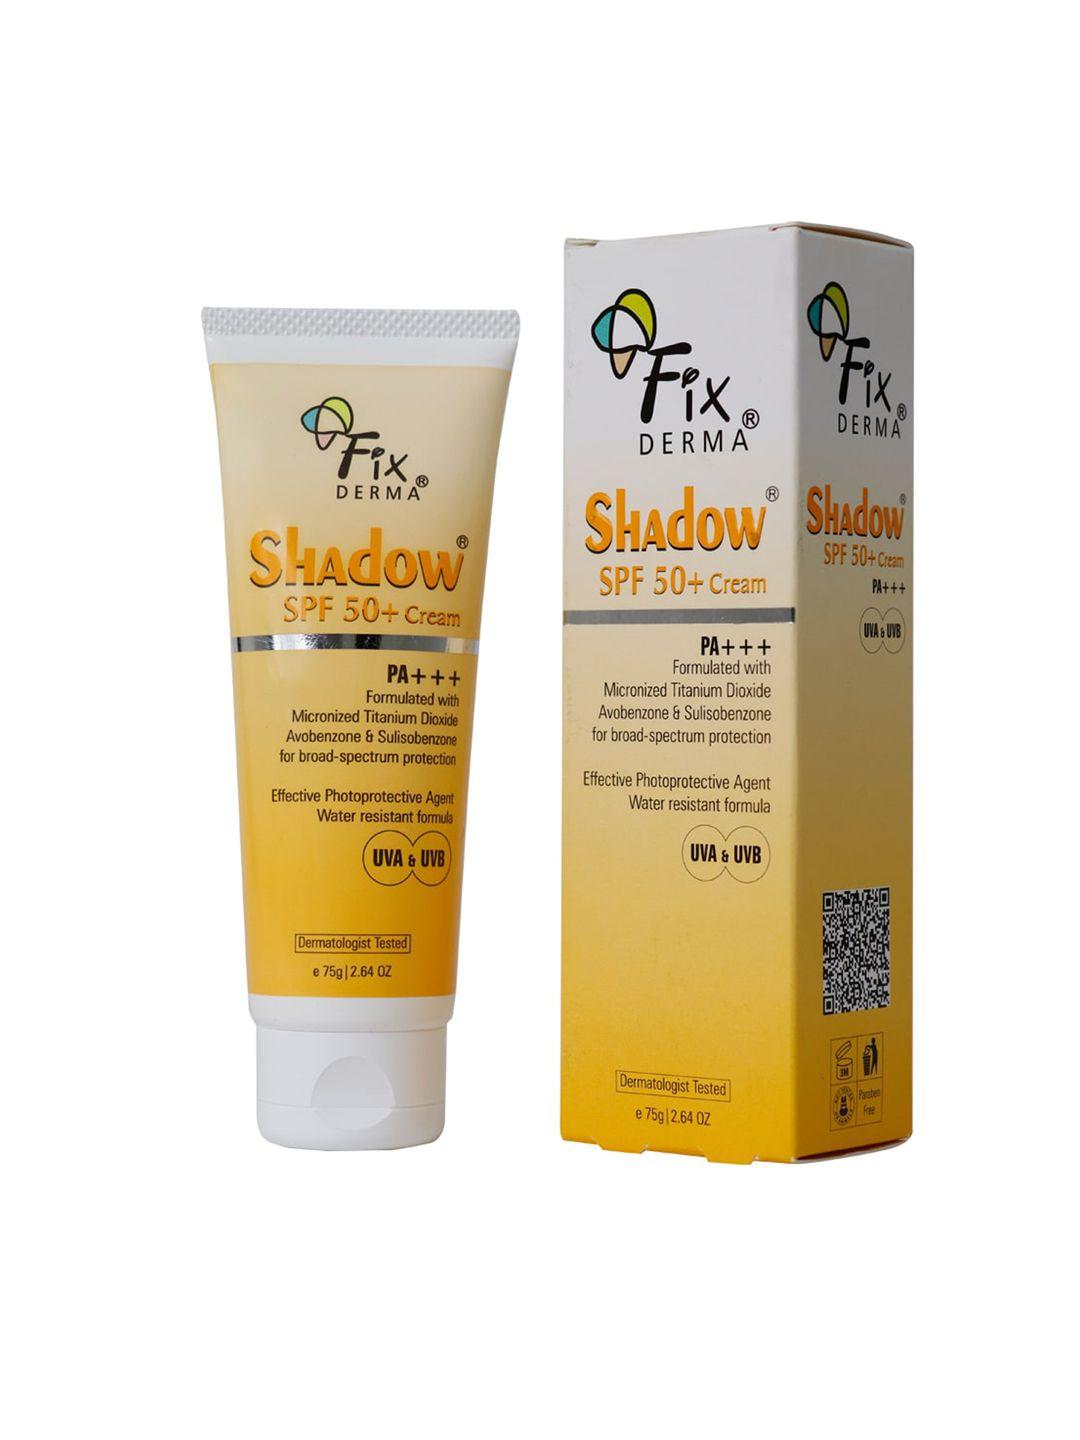 fixderma shadow sunscreen spf 50+ cream for dry skin with pa+++ protection - 75g